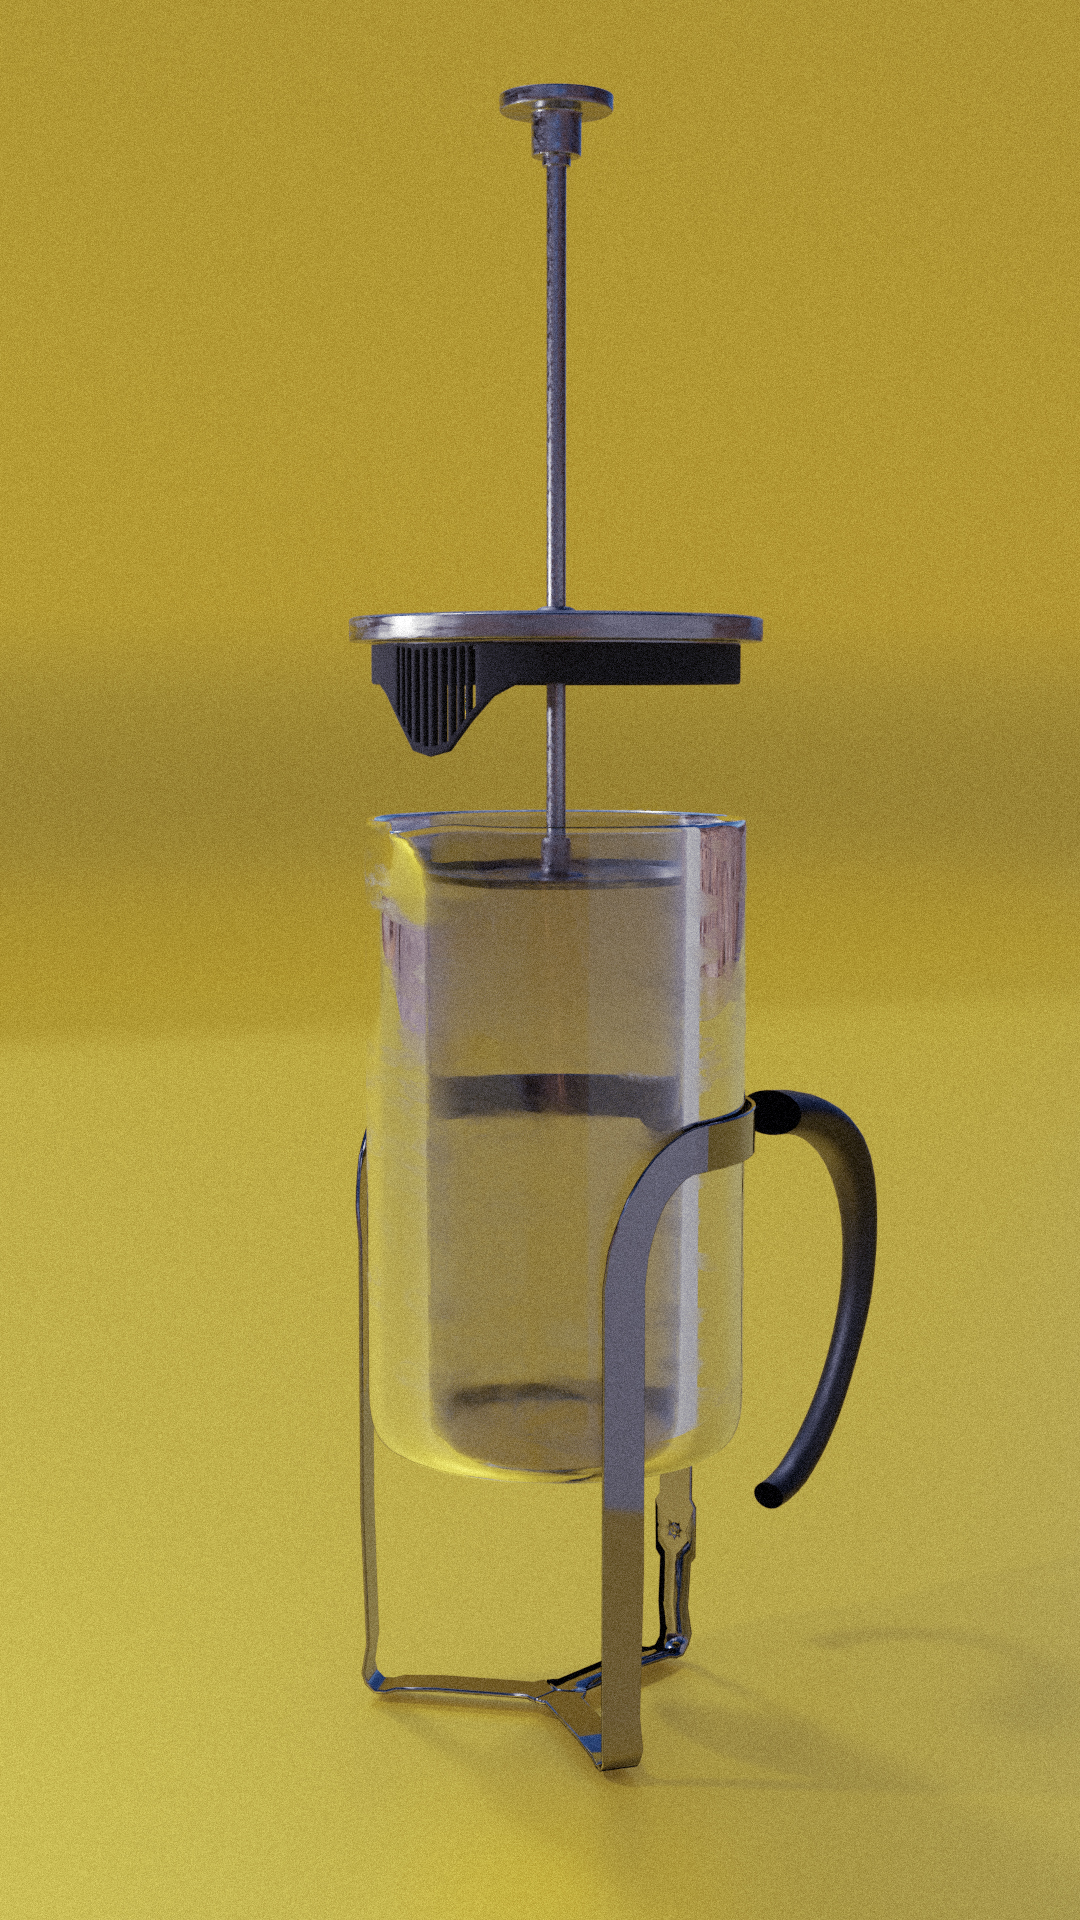 French Coffee Press - Kitchen Asset by Davilion preview image 5